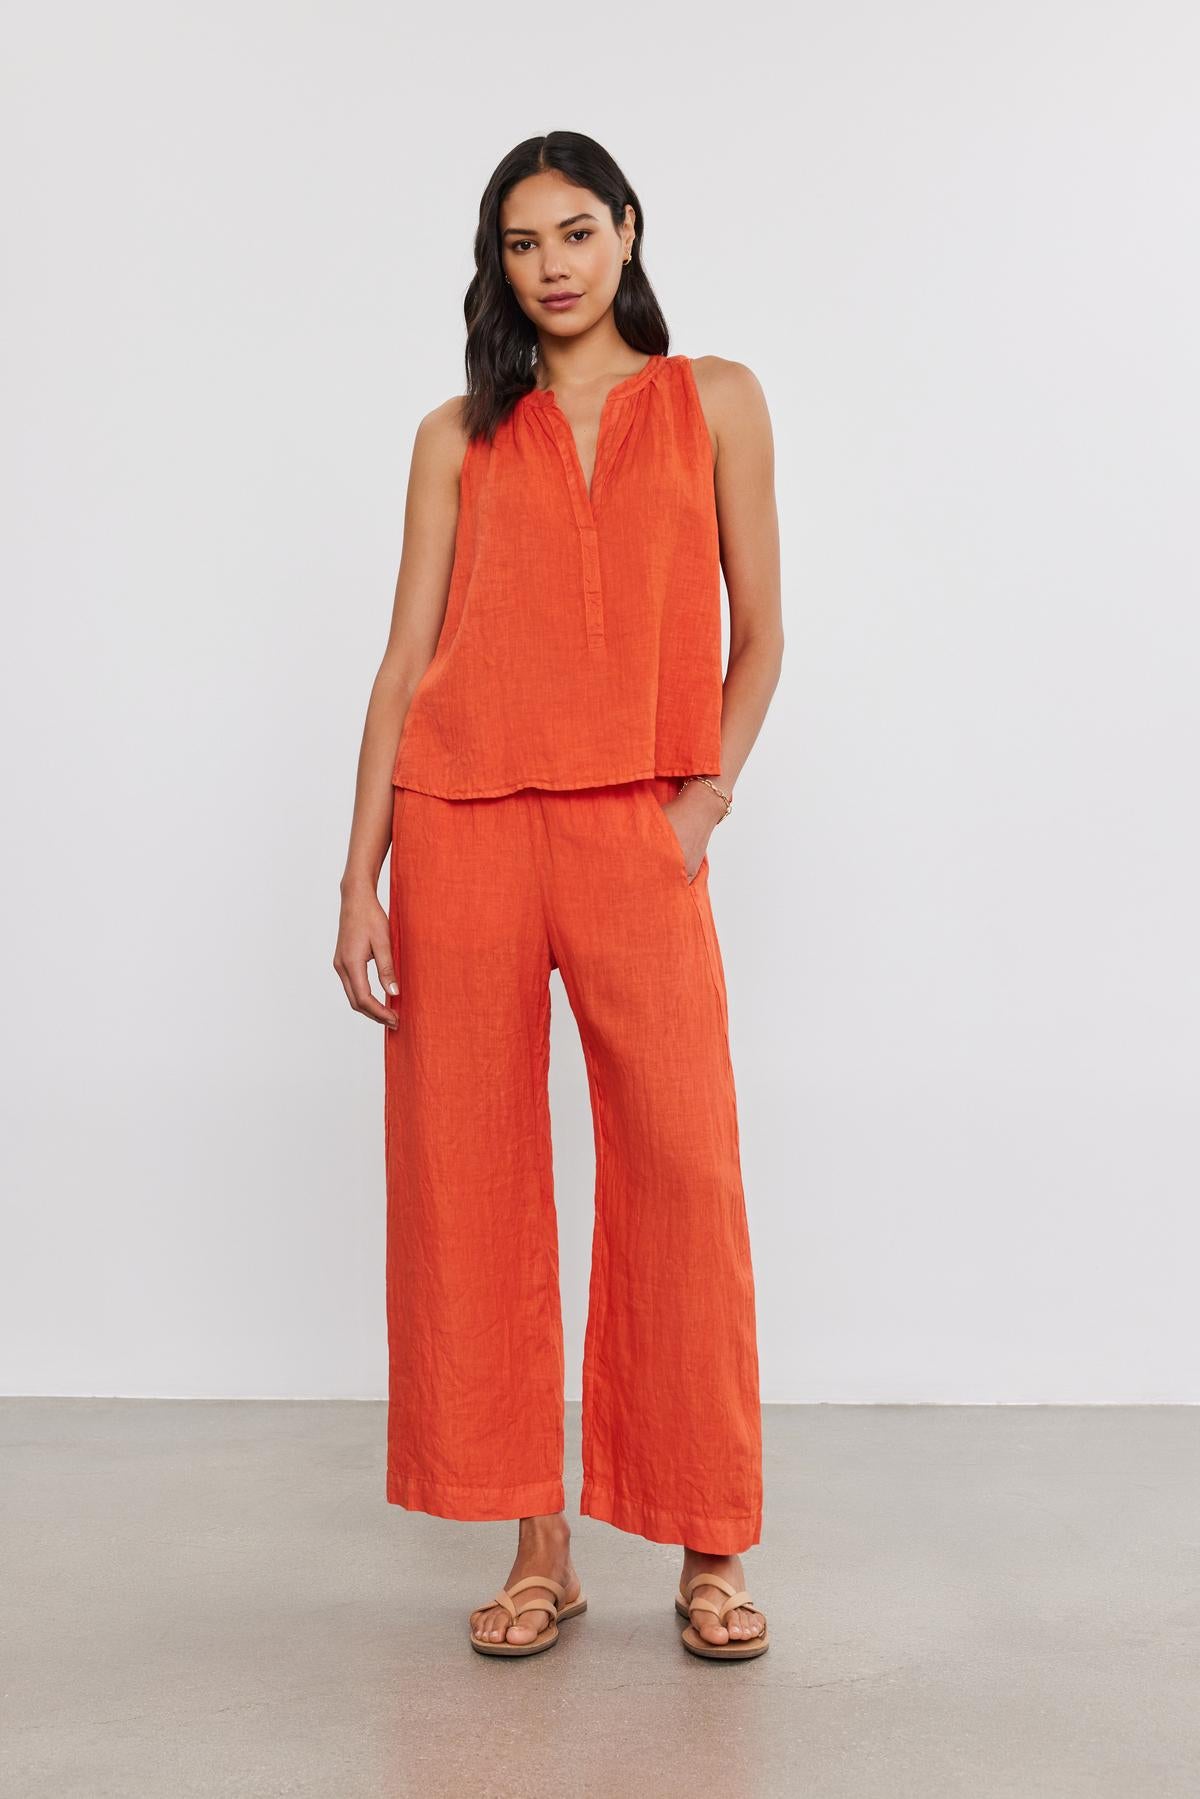 Person is standing against a plain background, wearing an orange sleeveless top and matching LOLA LINEN PANT by Velvet by Graham & Spencer. They are also wearing sandals.-36910043857089